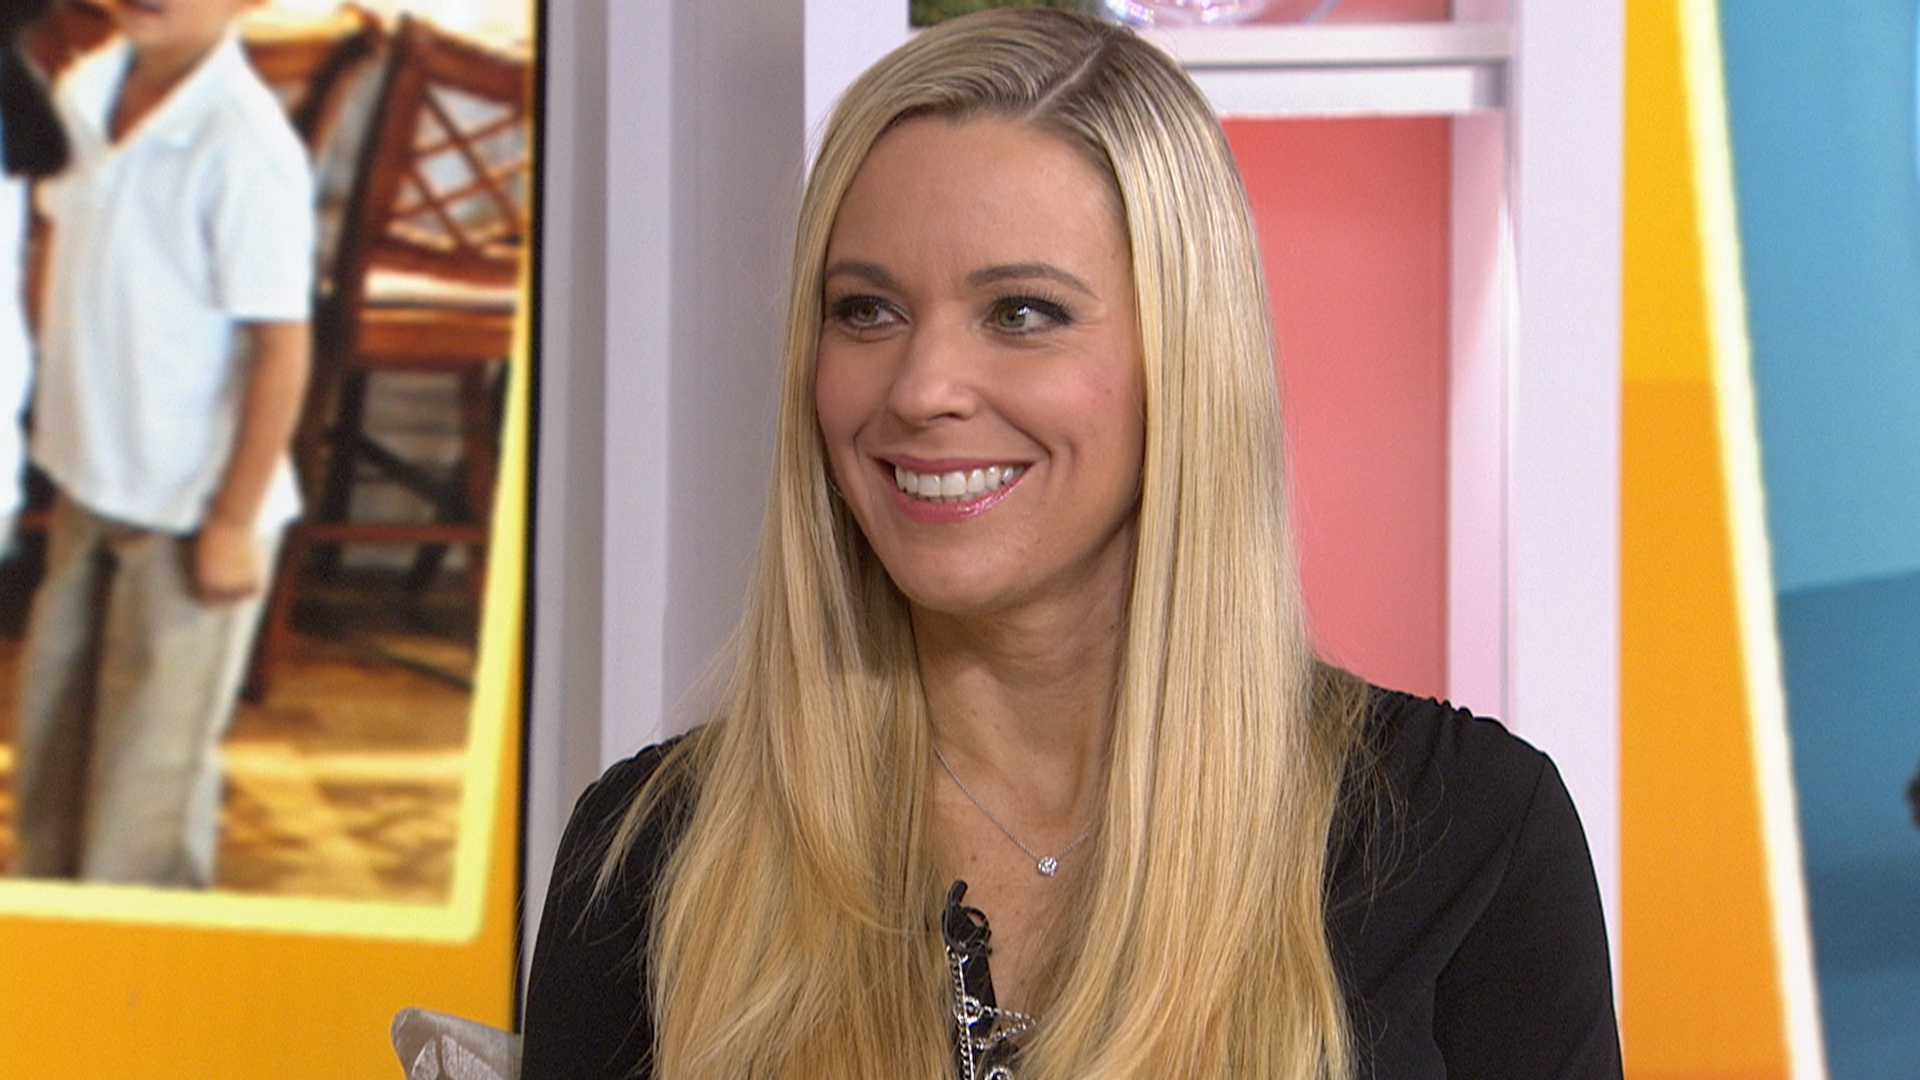 Kate Gosselin and her kids are back on TV with the return of “Kate Plus 8